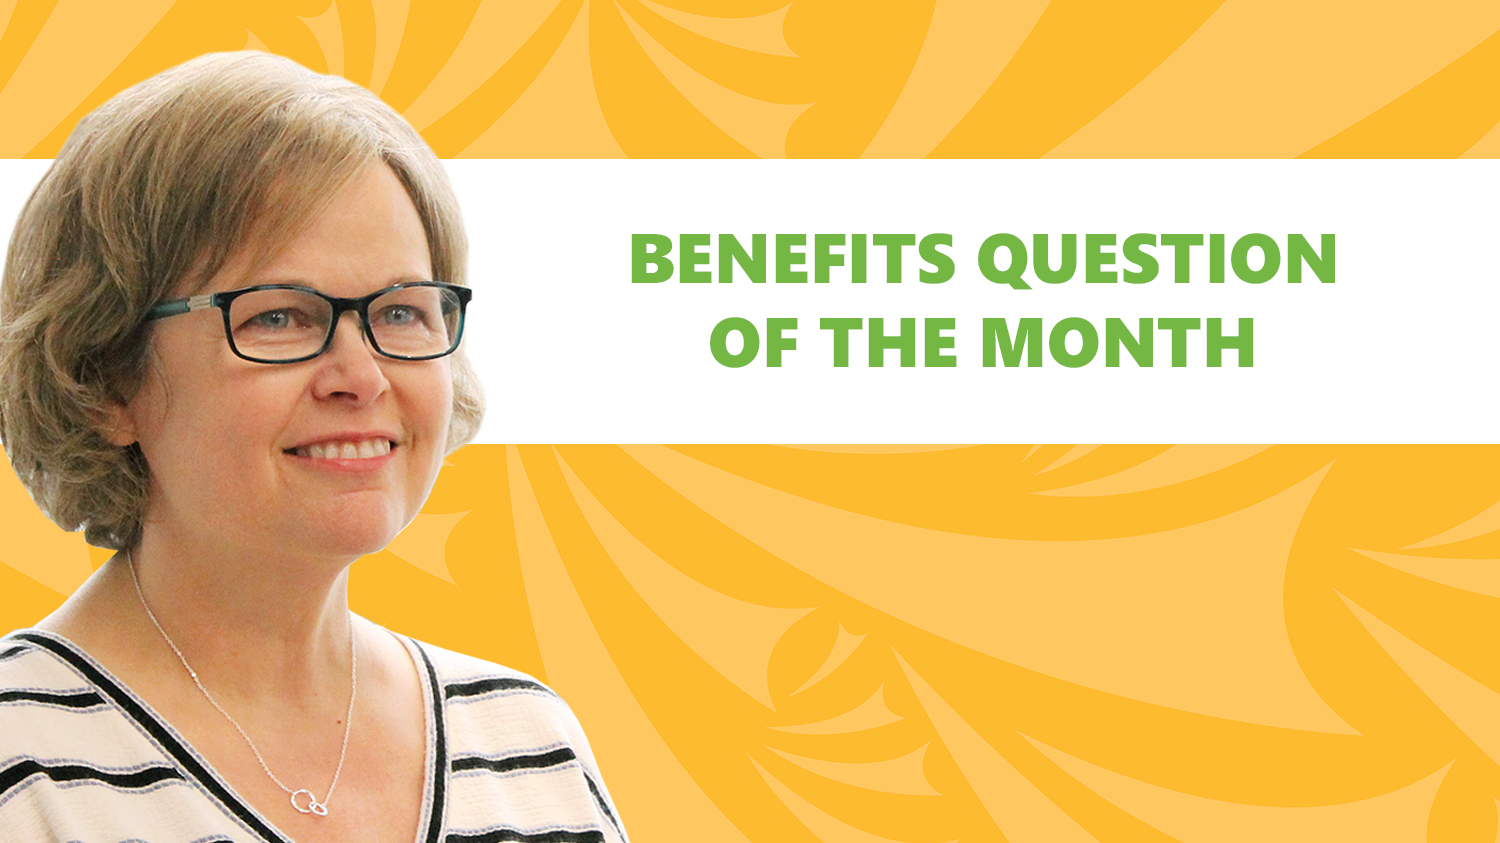 Benefits Q&A: How Do FMLA Policies & Processes Apply to Benefits?